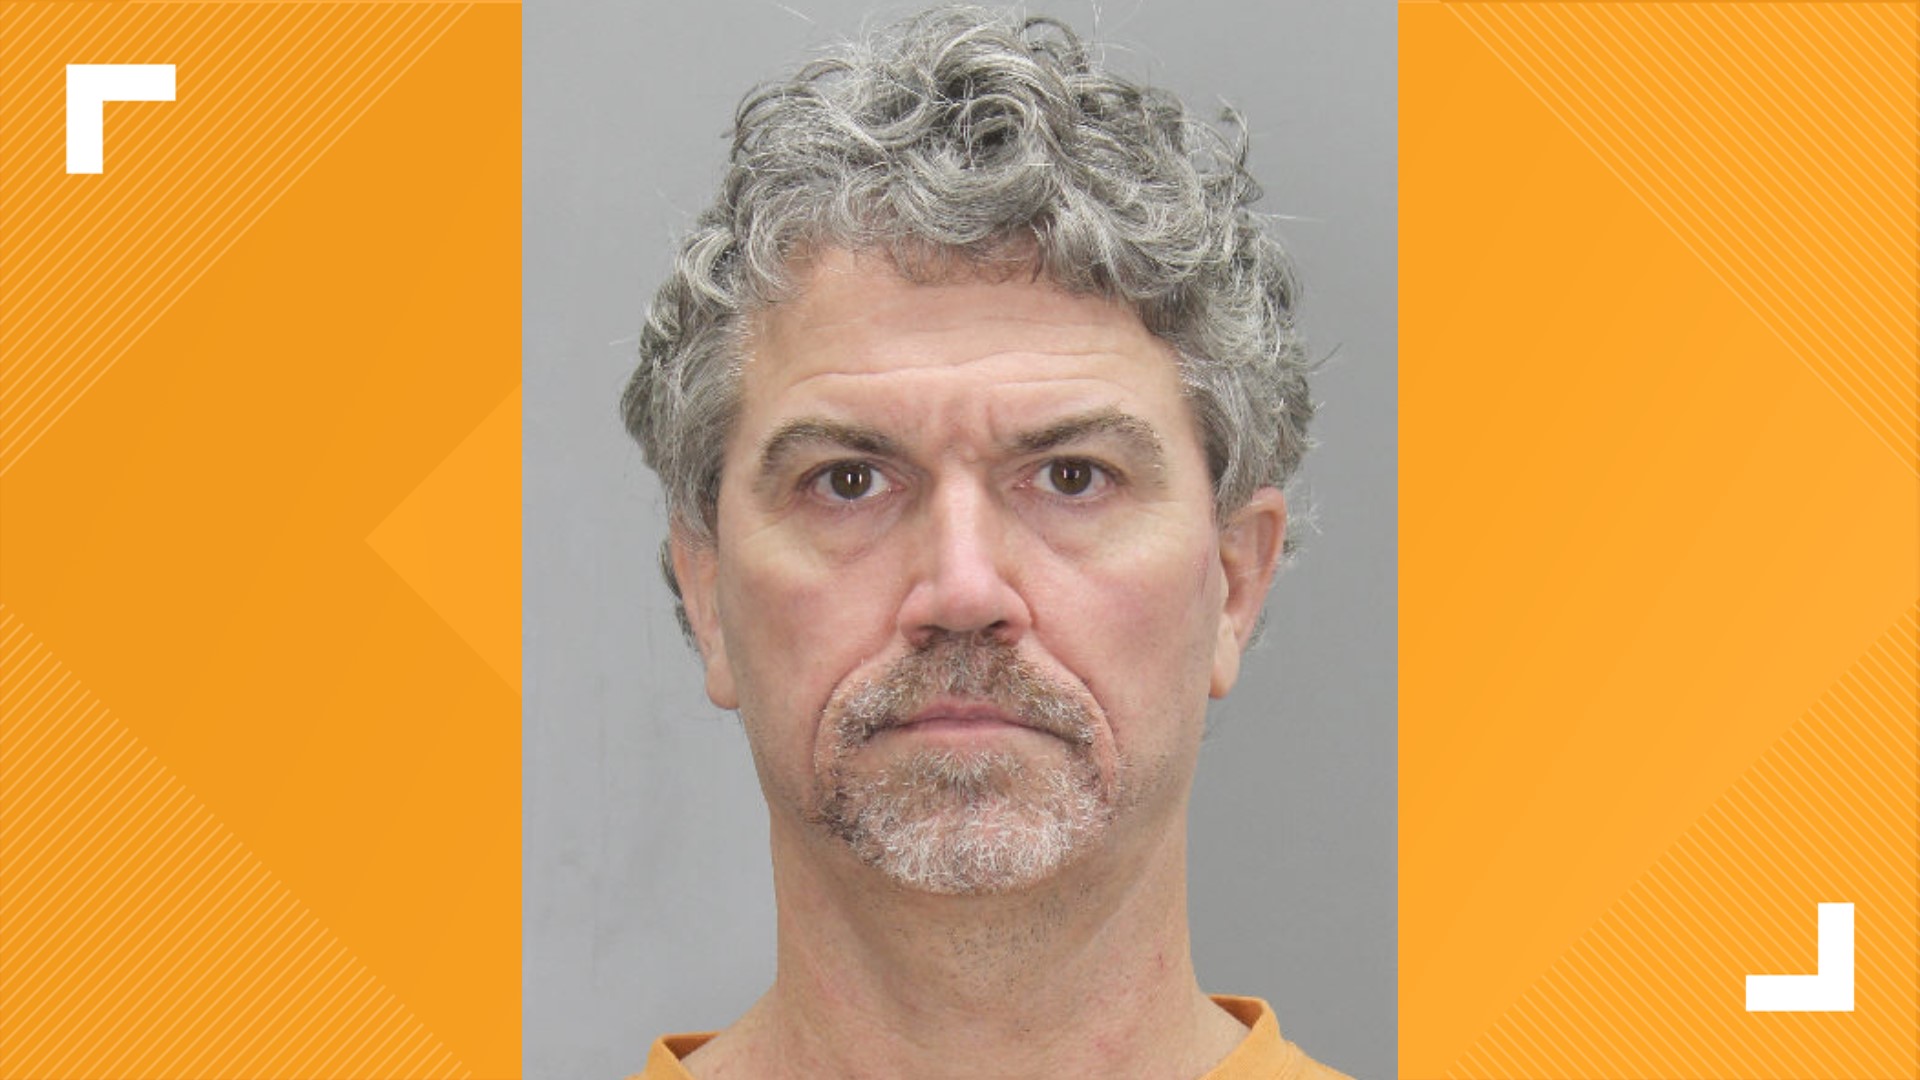 Drew John Steiner was indicted for rape, abduction and unlawful videotaping. He has been behind bars since September 2020 on charges he assaulted his wife.